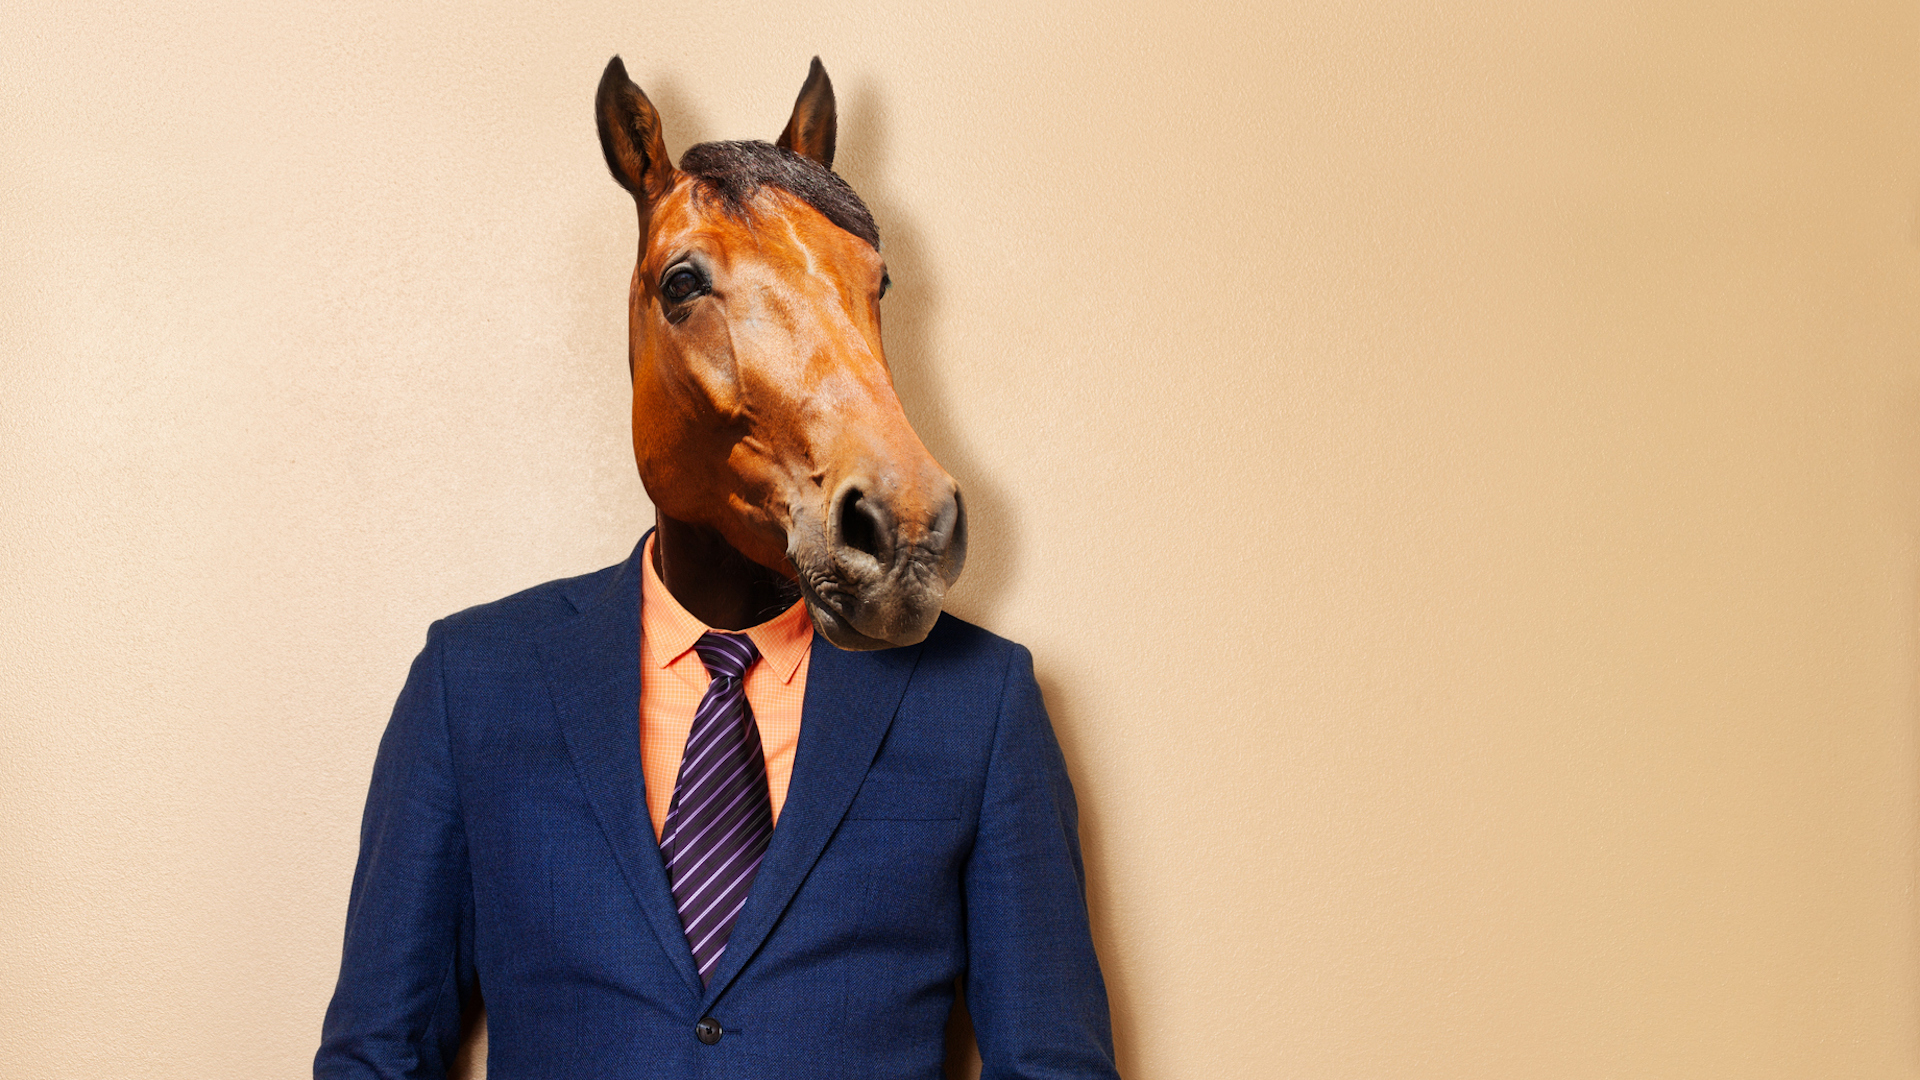 A well-dressed horse